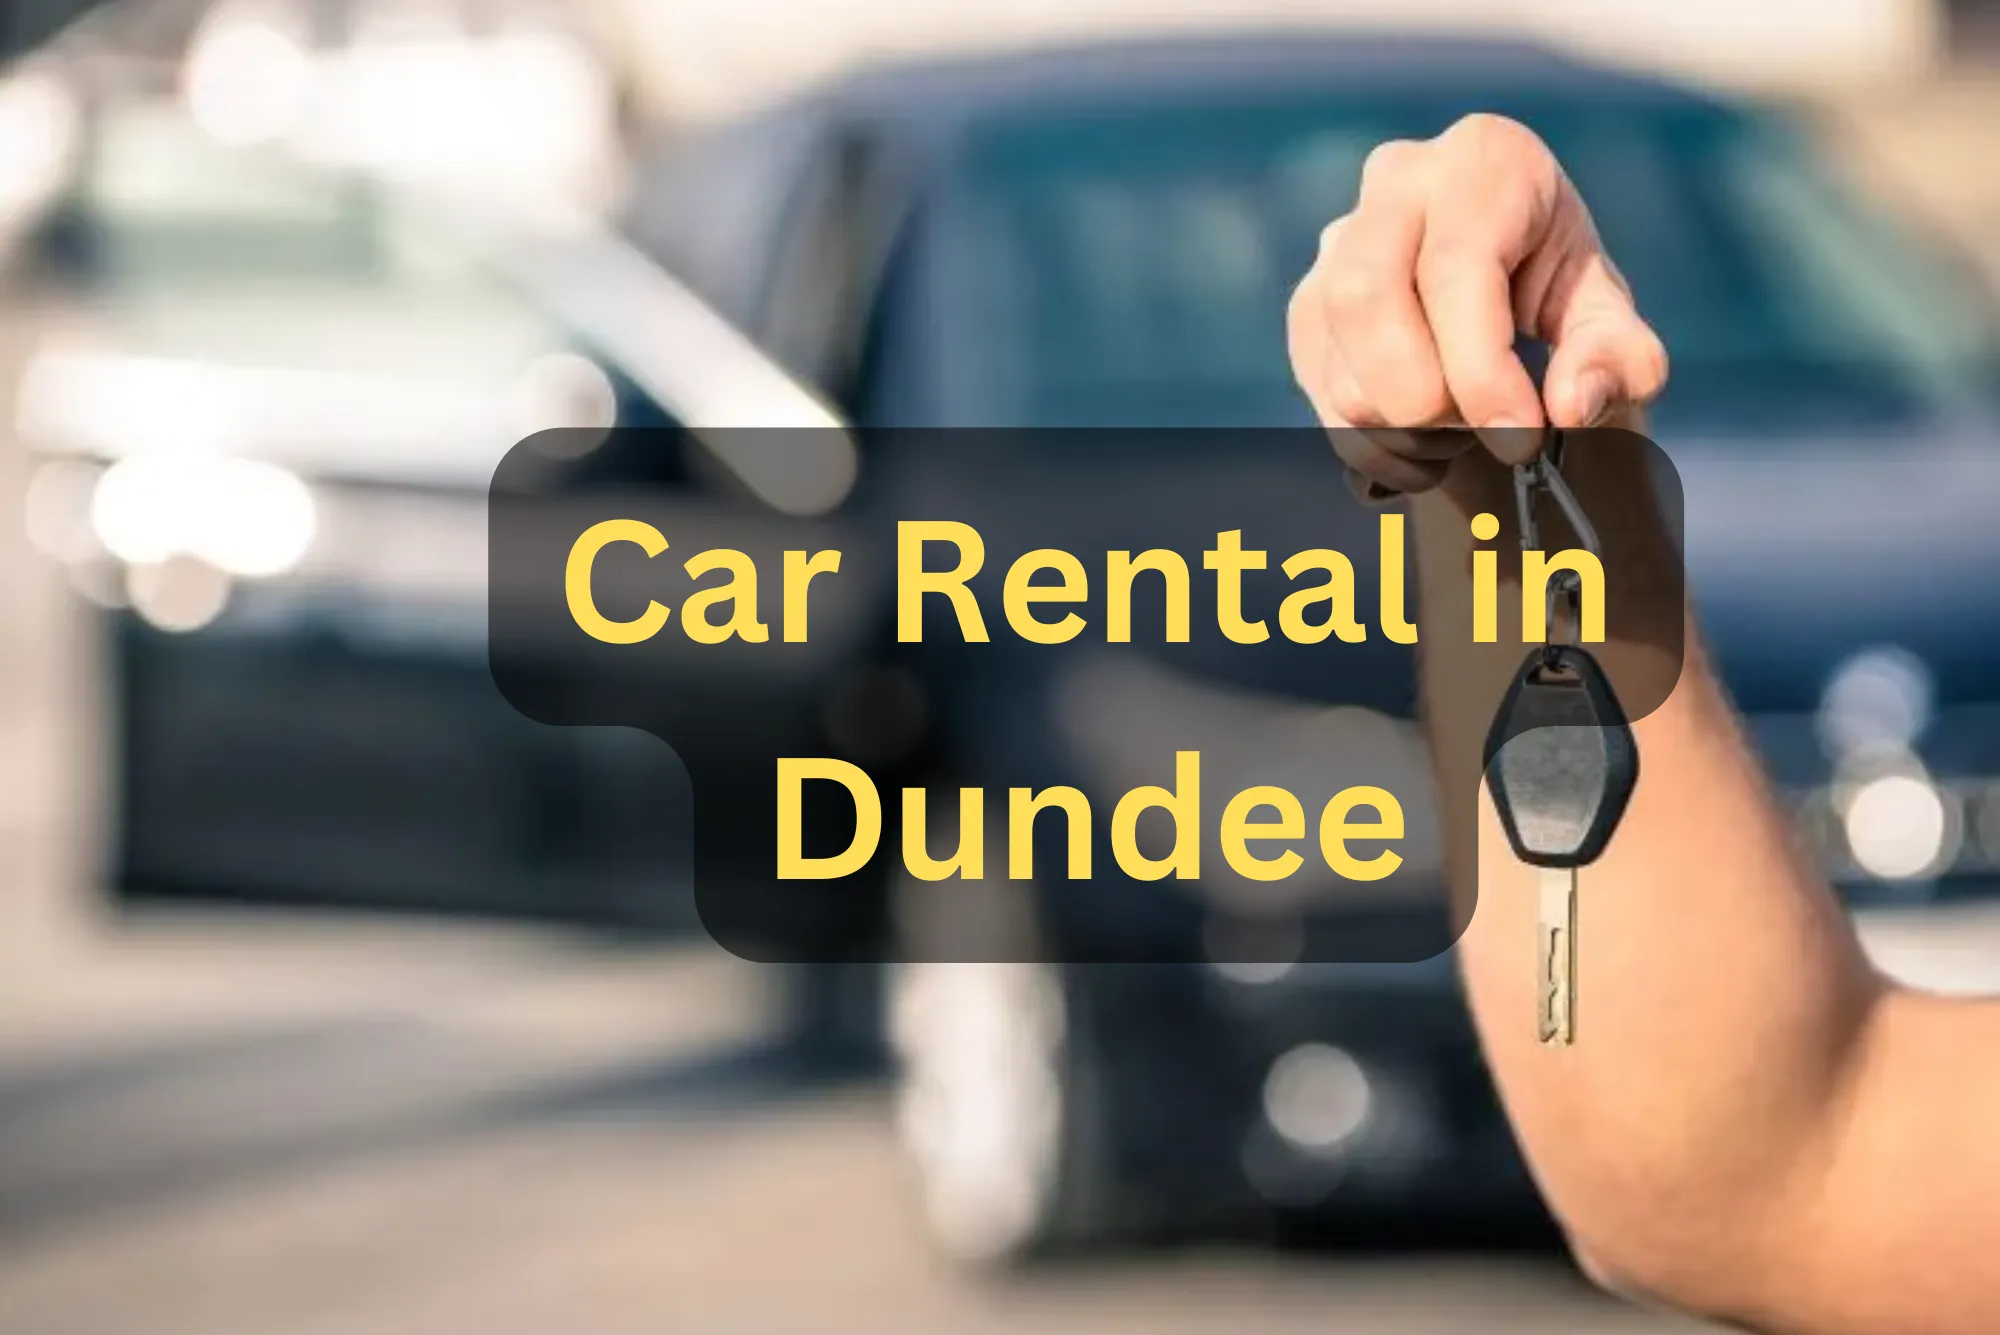 Car Rental in Dundee